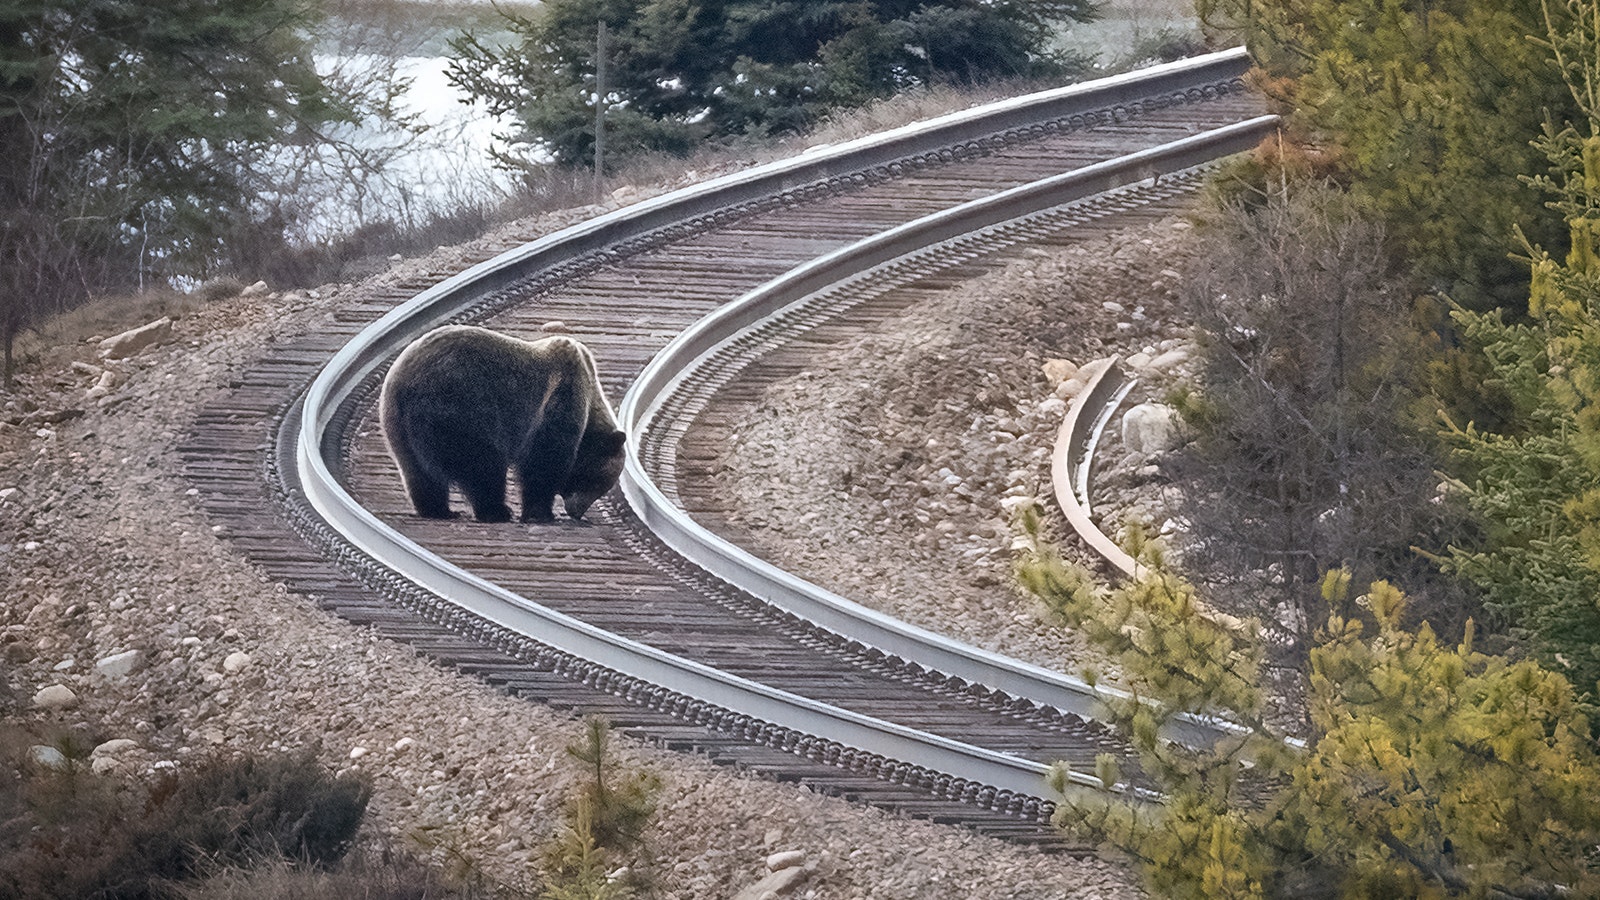 A grizzly bear grazes for spilt grain on the train tracks in Banff National Park, Alberta, Canada. Since 1980 in Montana, 68 grizzlies, many "drunk" on fermented grain, have been killed by trains.